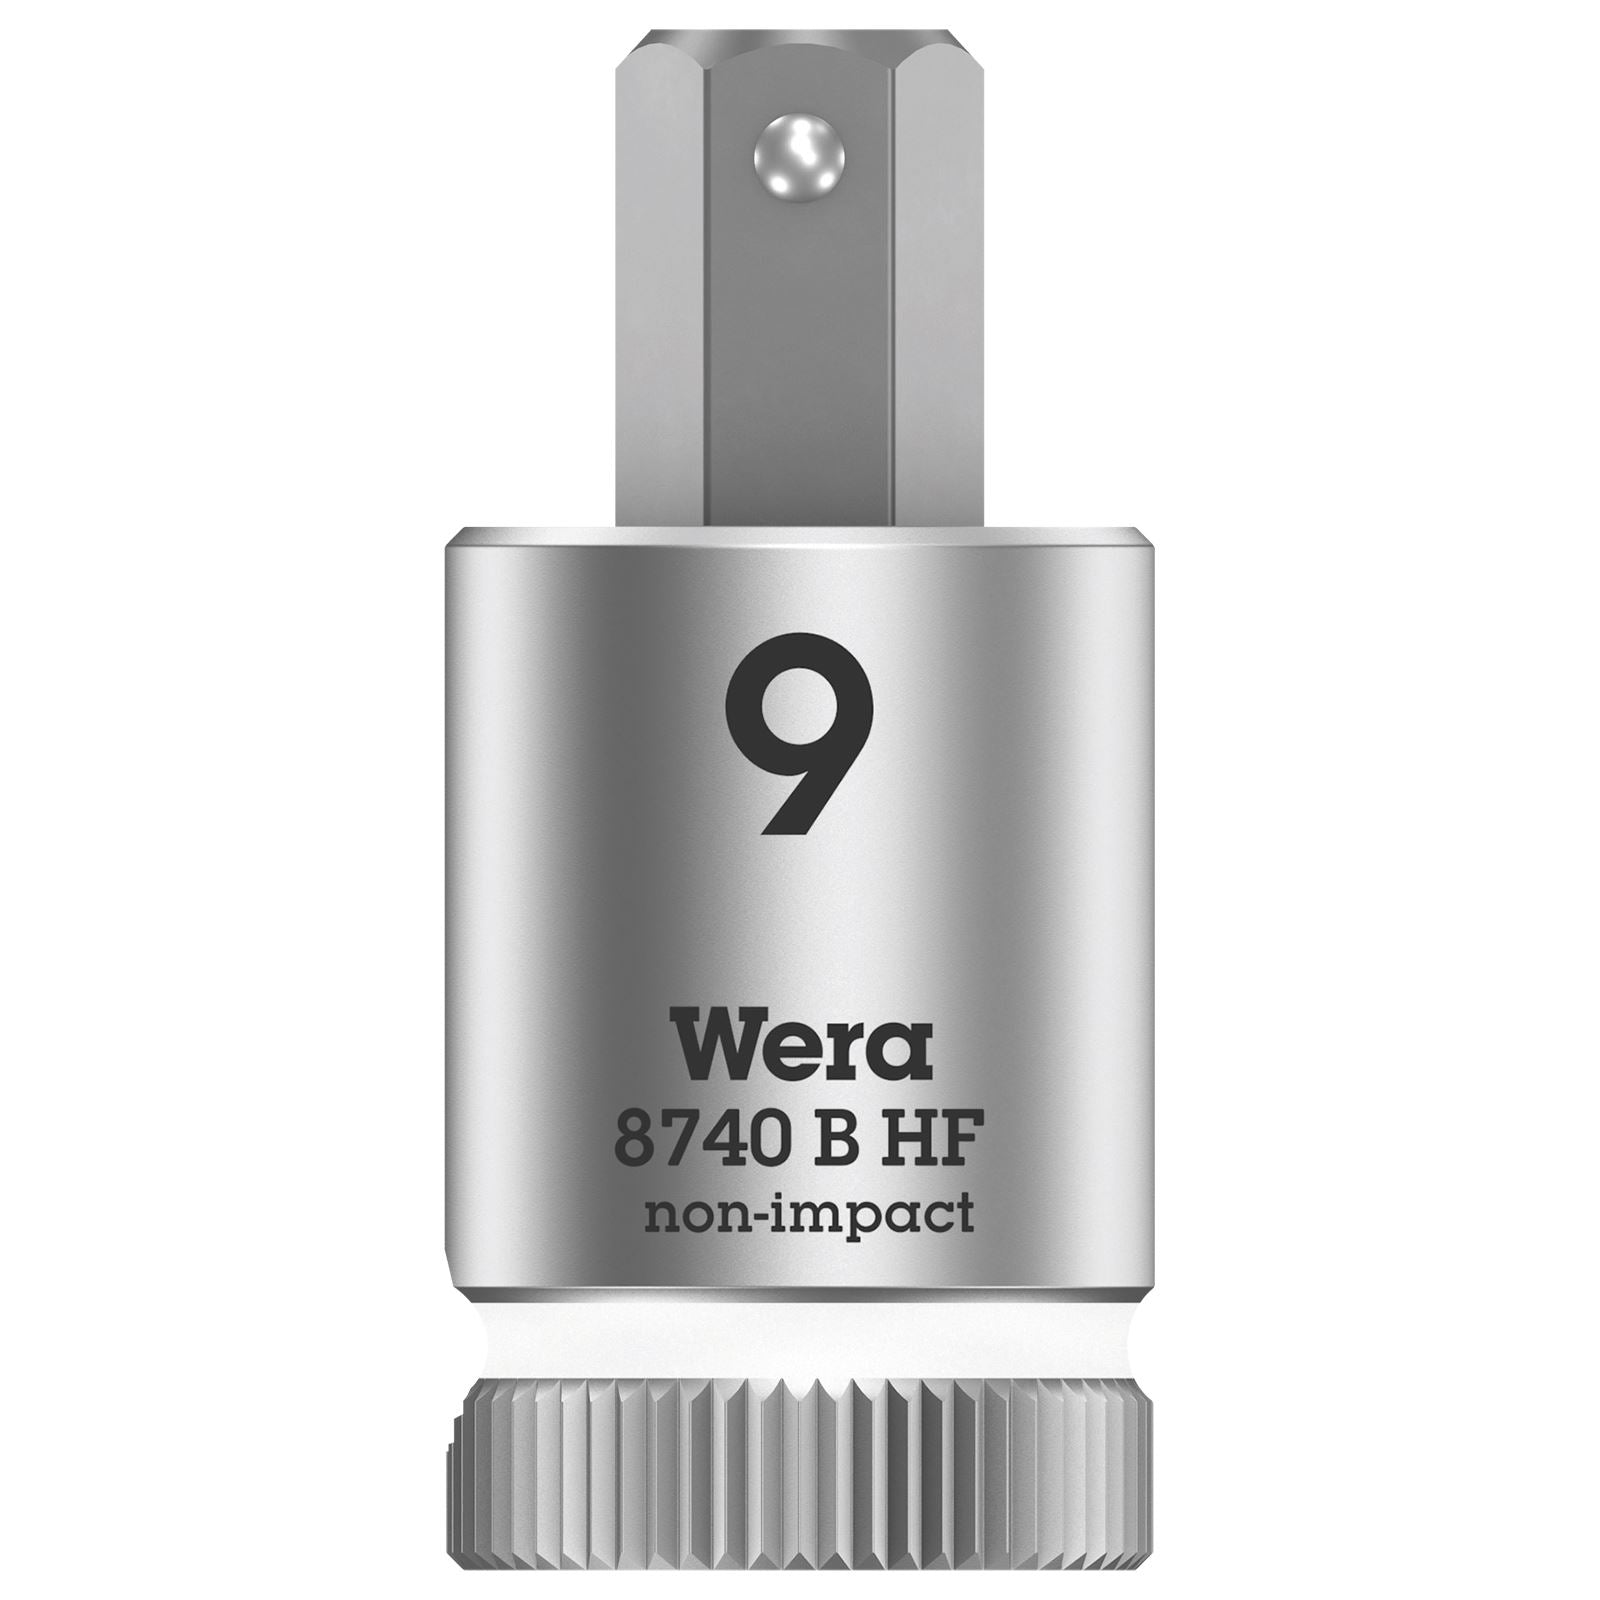 Wera Socket Bit Hex HF 3/8" Drive Zyklop Socket Bits with Holding Function 8740 B 3-10 mm